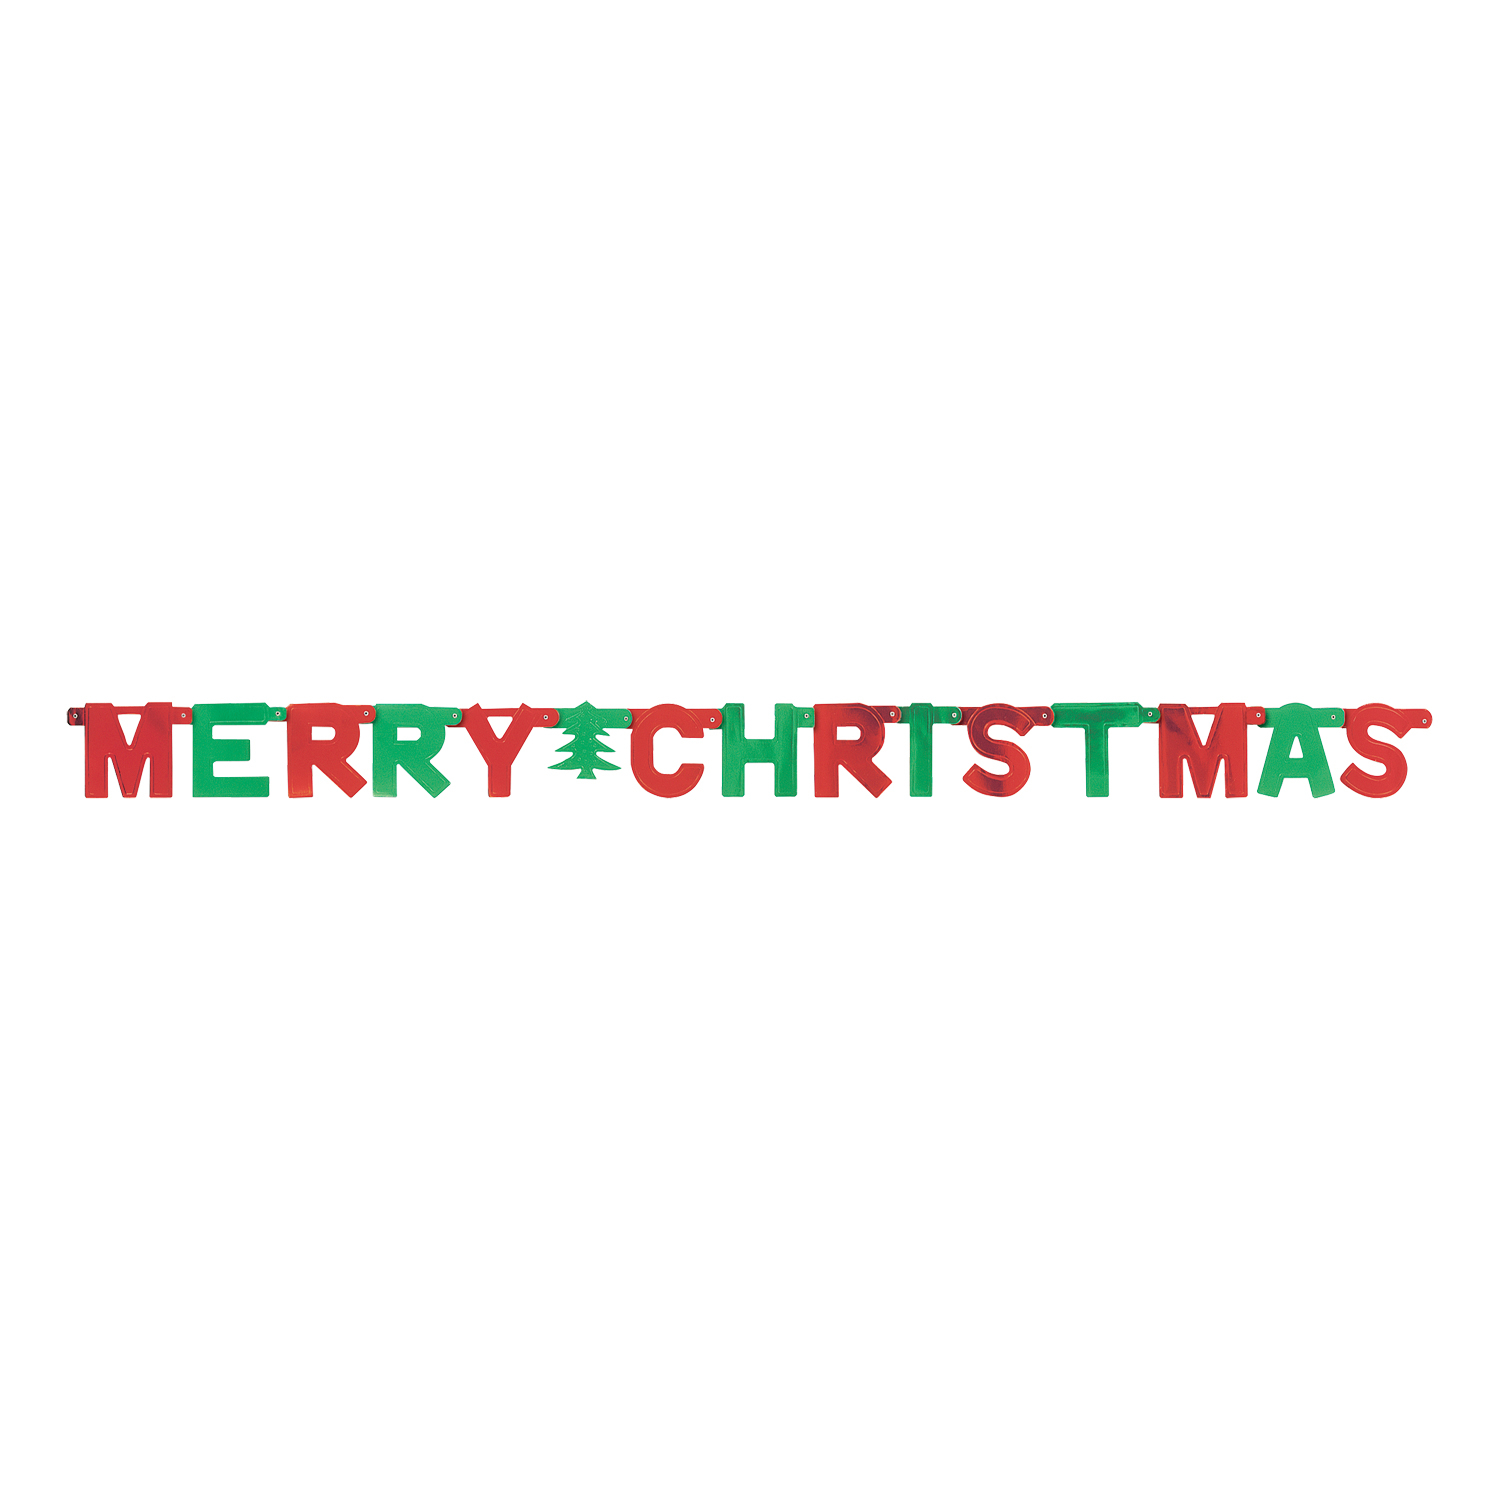 Red & Green Merry Christmas Letter Banners 1.5m x 10.8cm - 12 PC ...